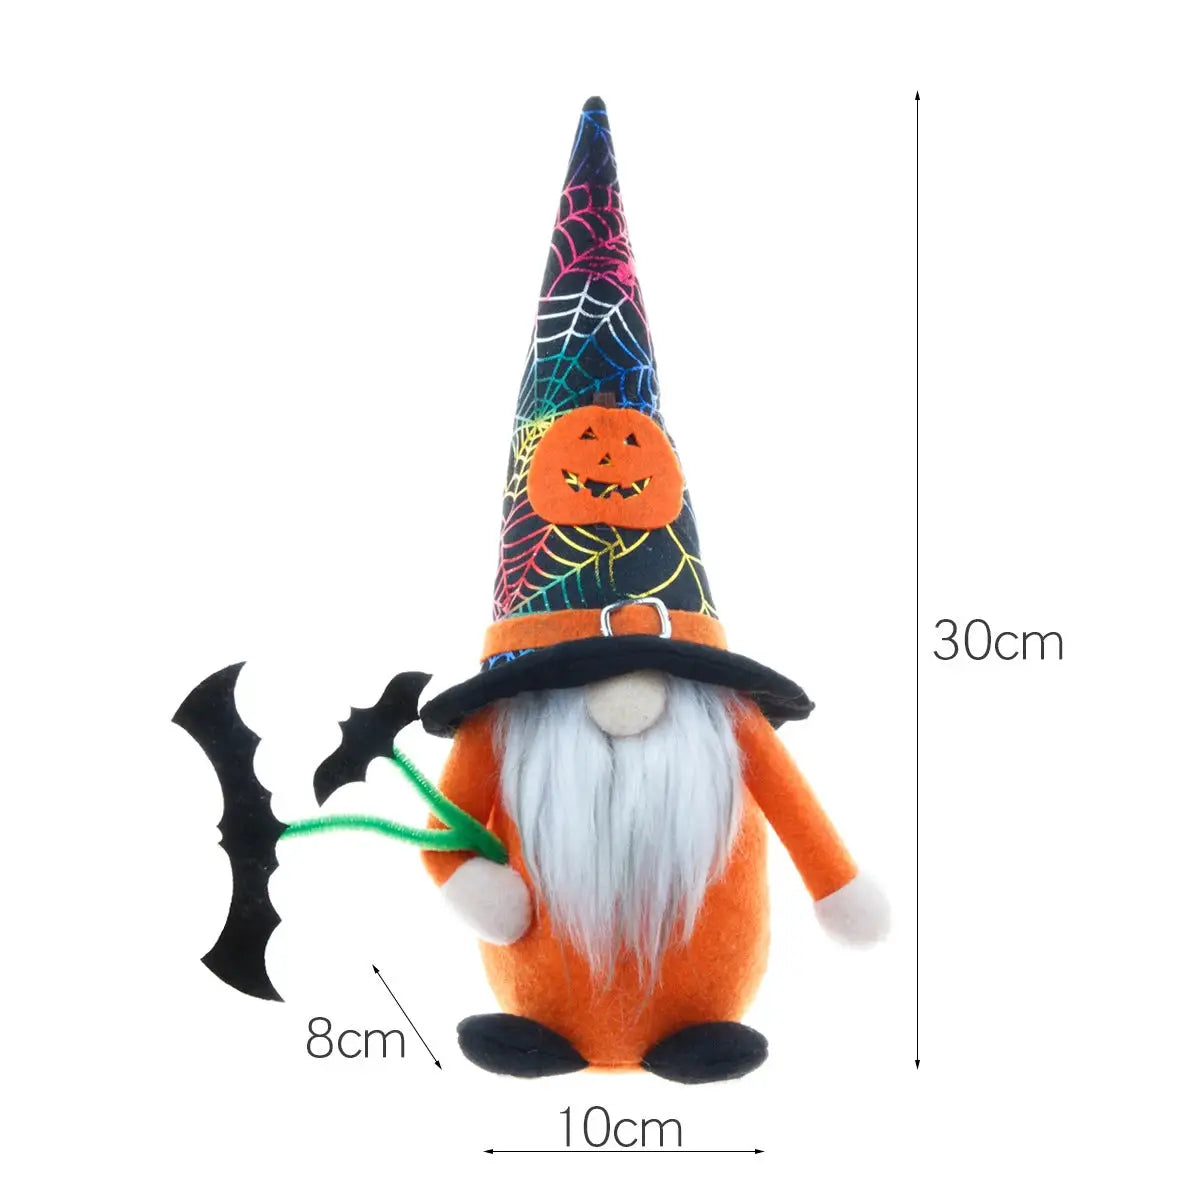 a stuffed toy with a witches hat and a bat